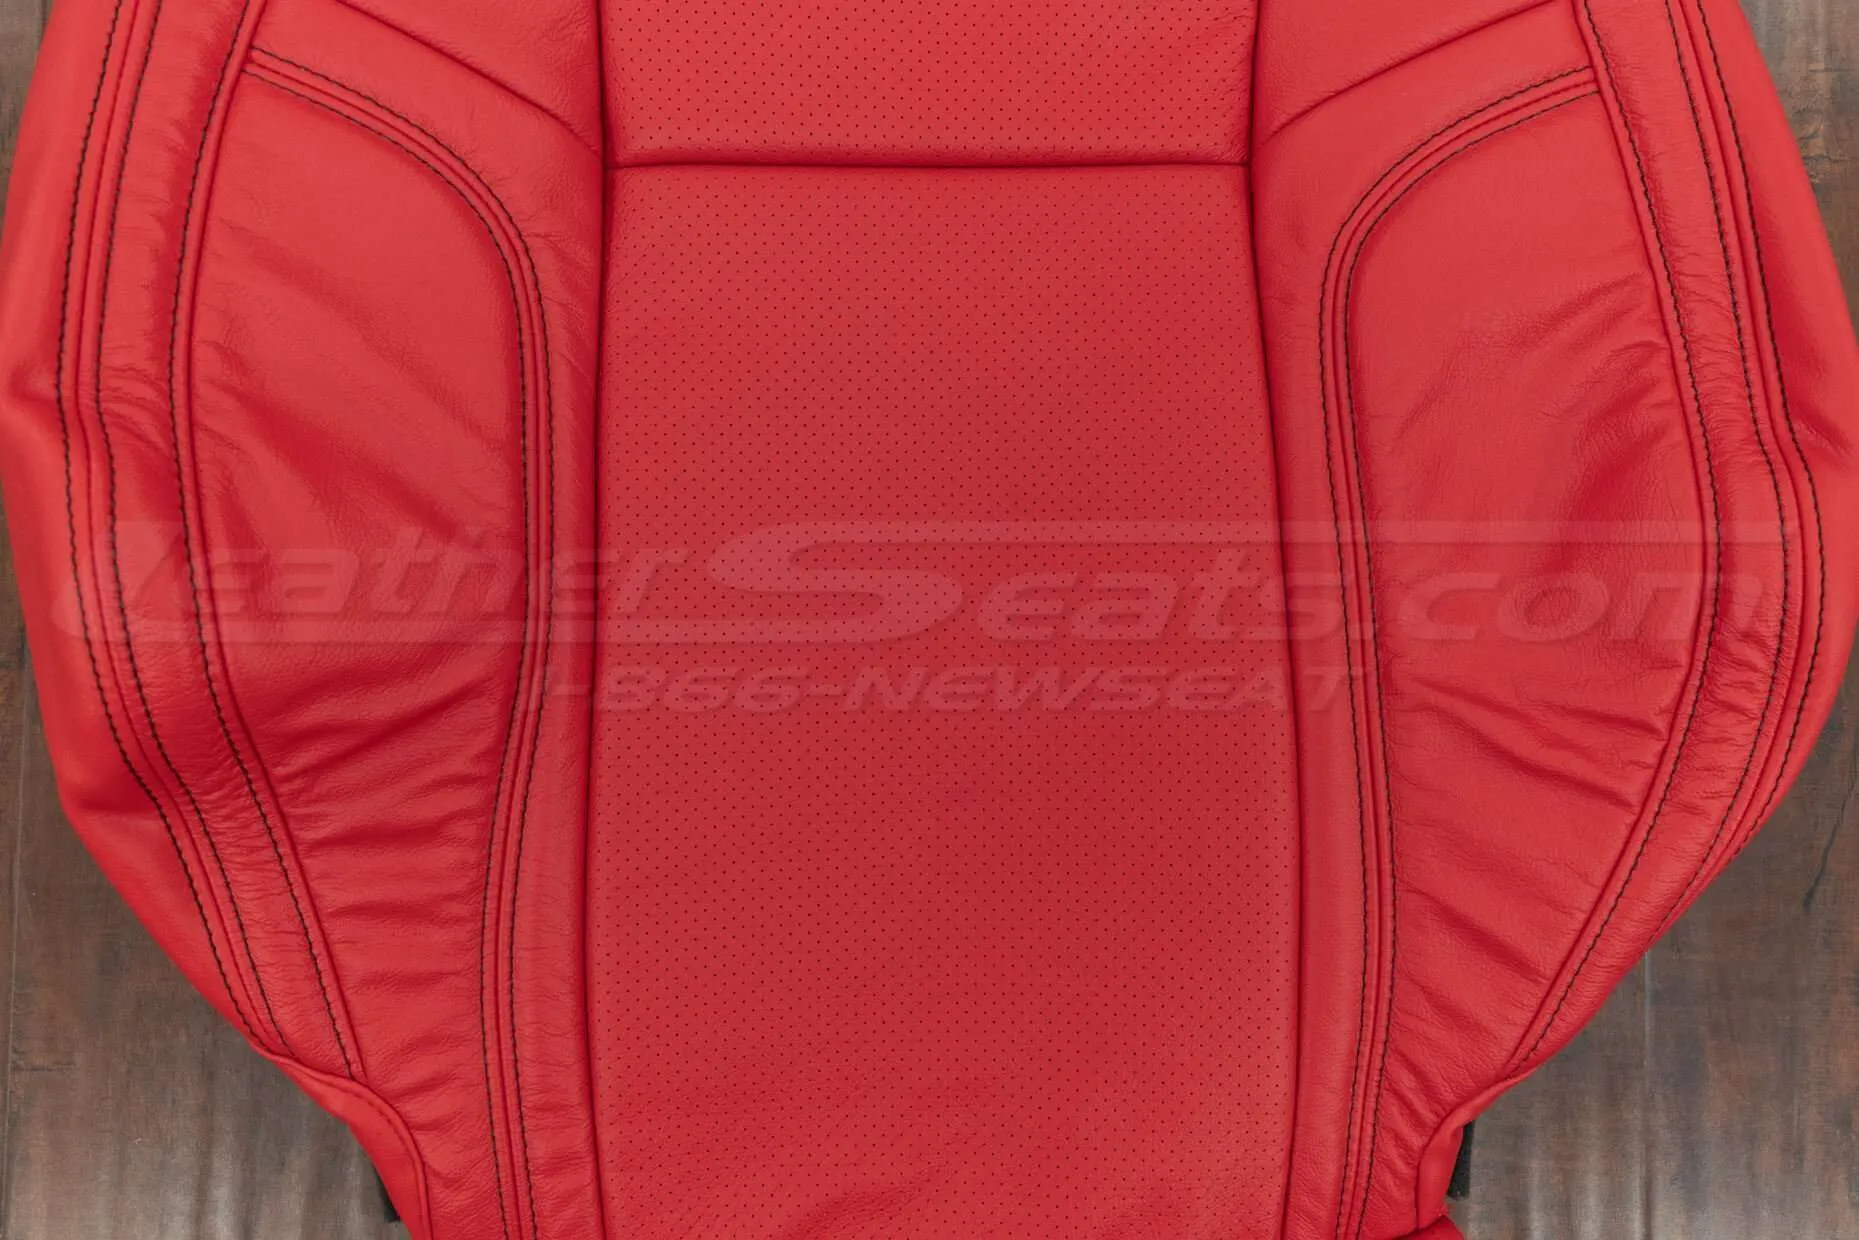 Perforated body on front backrest